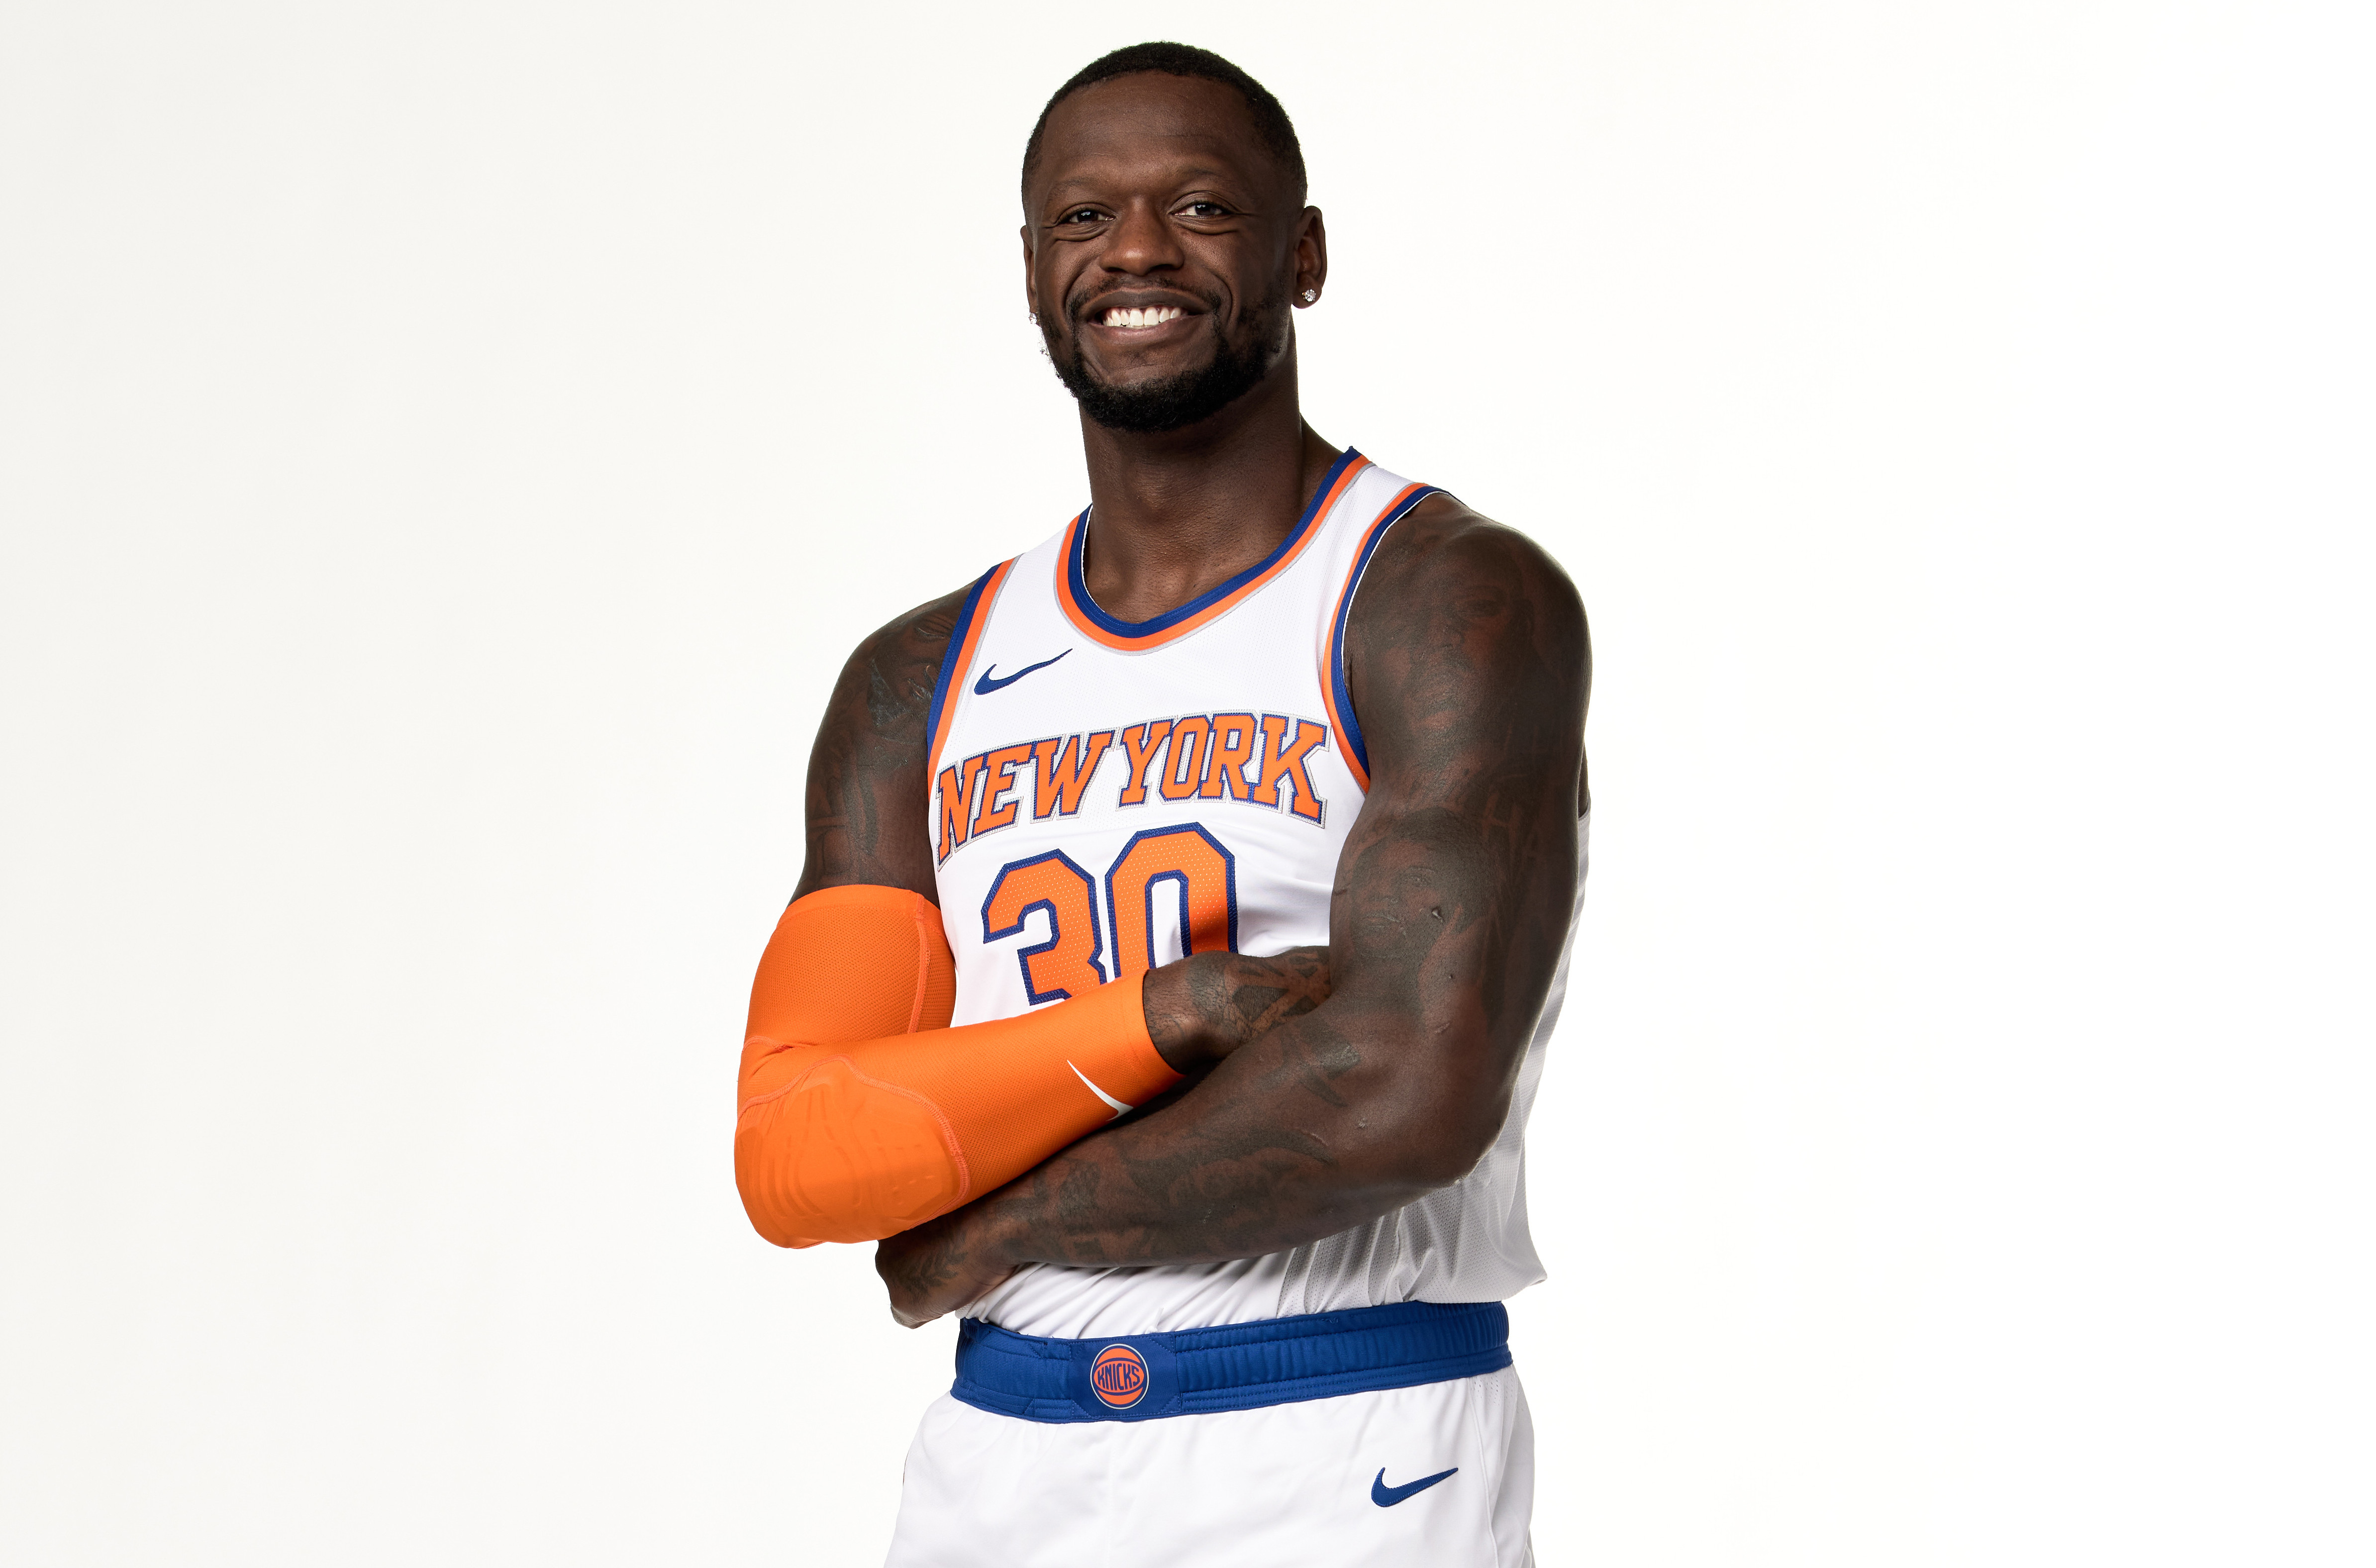 KITH made an NBA jersey so bad only the New York Knicks could wear it